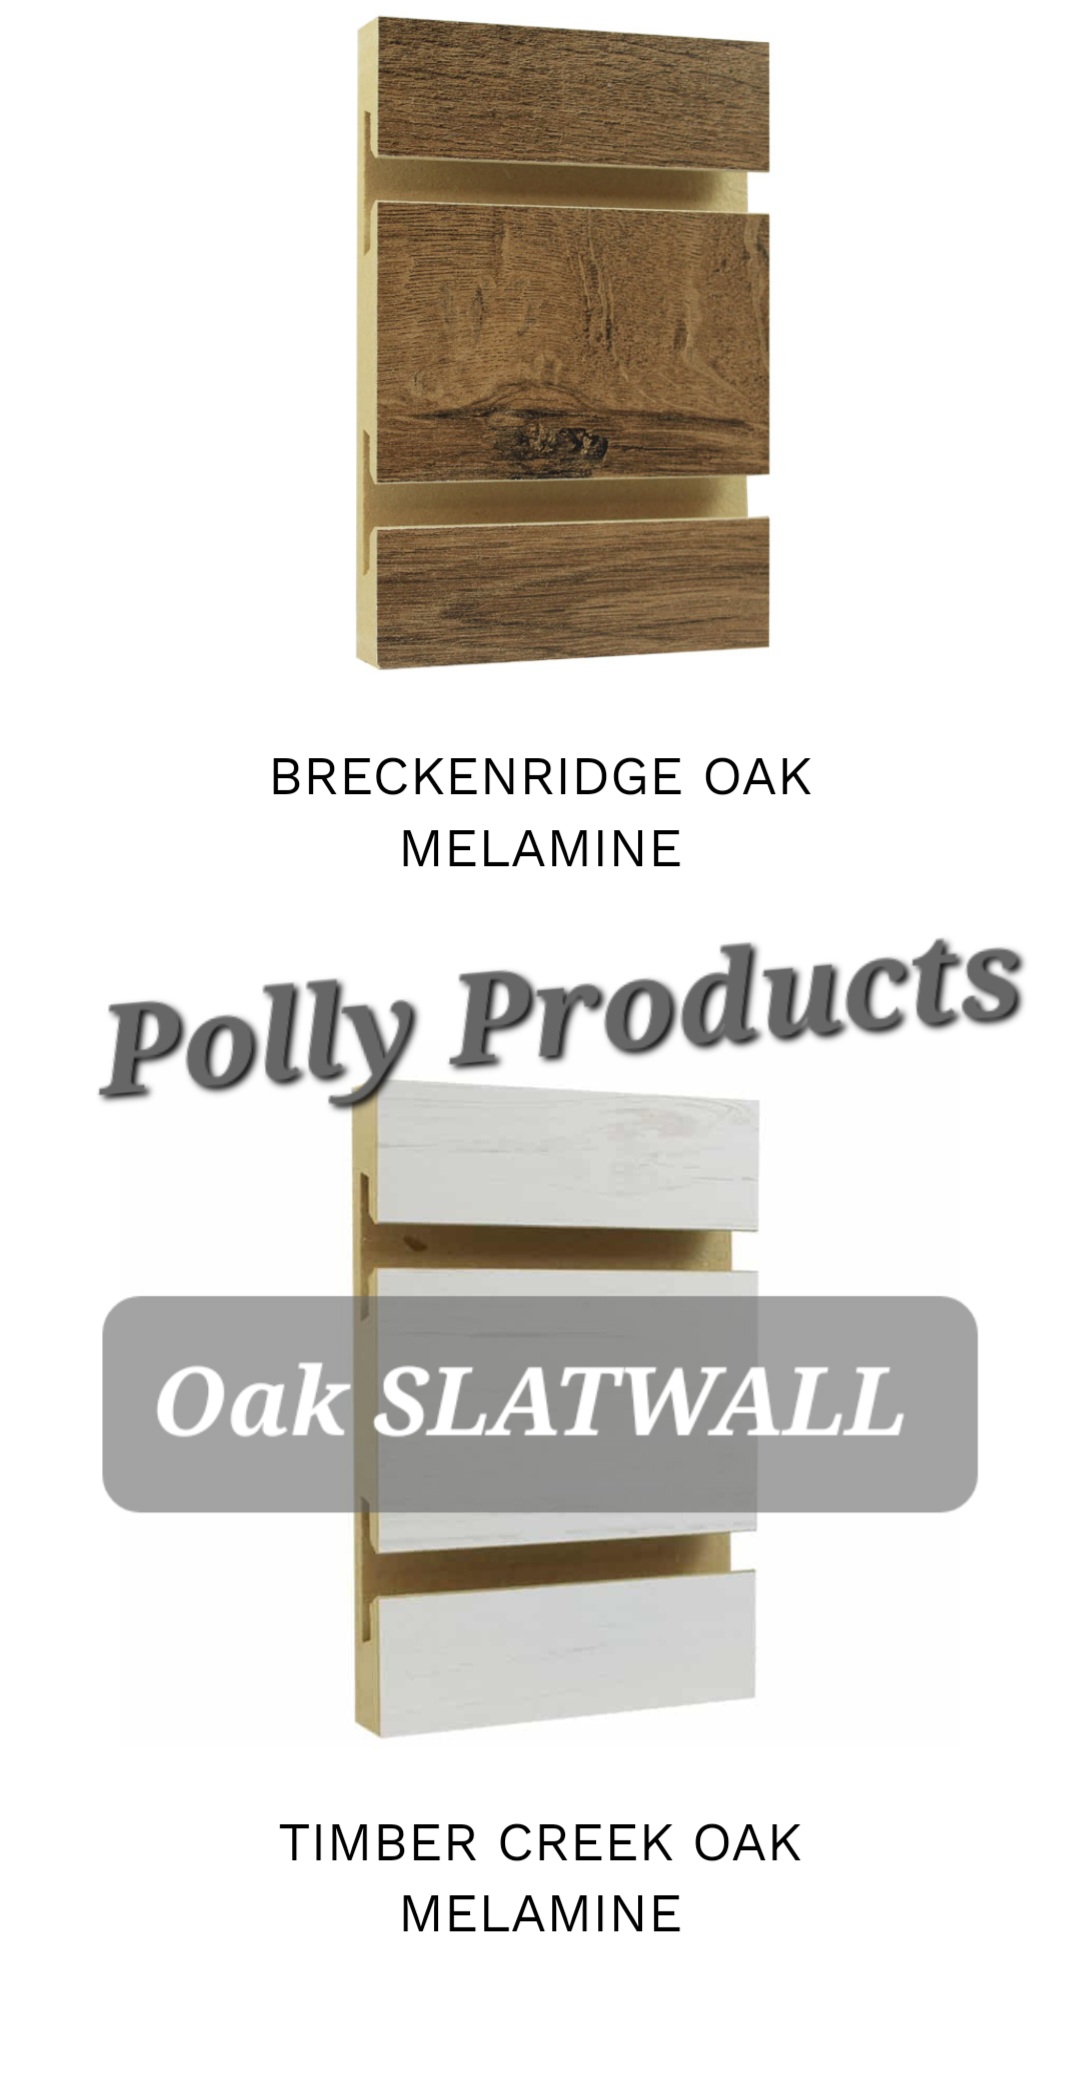 PPC OAK Slatwall. MADE IN THE USA 🇺🇸 QUALITY.